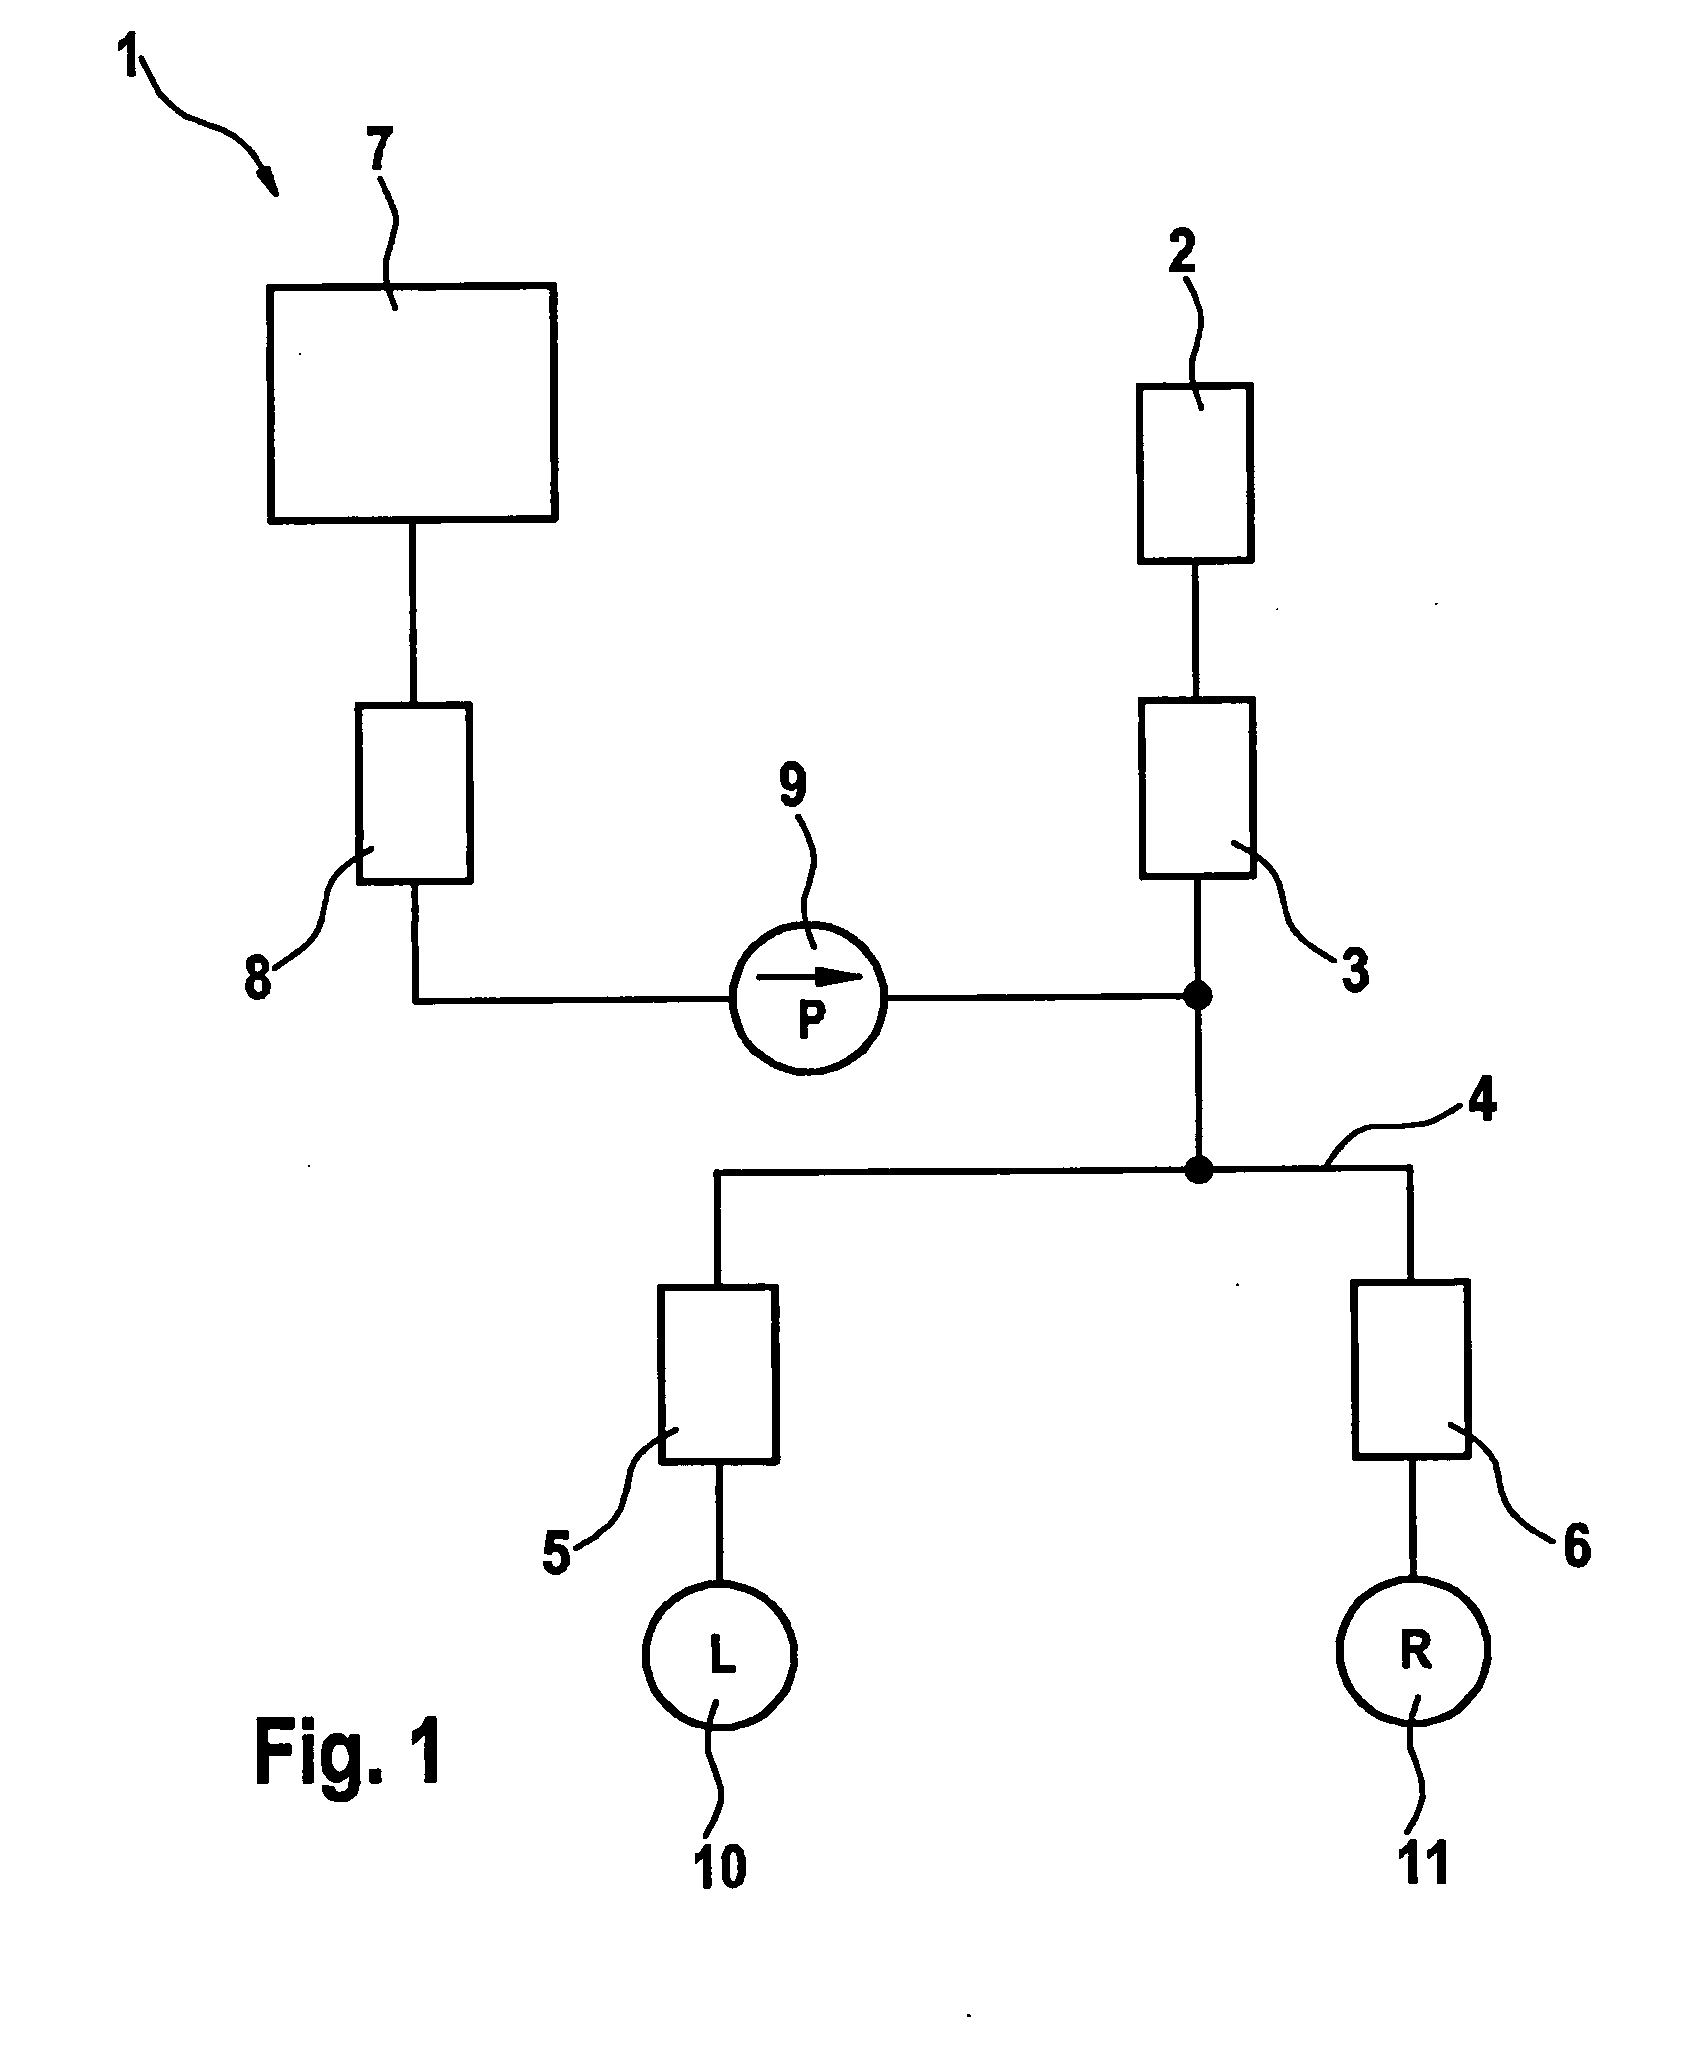 Method for operating an hydraulic brake system in a motovehicle